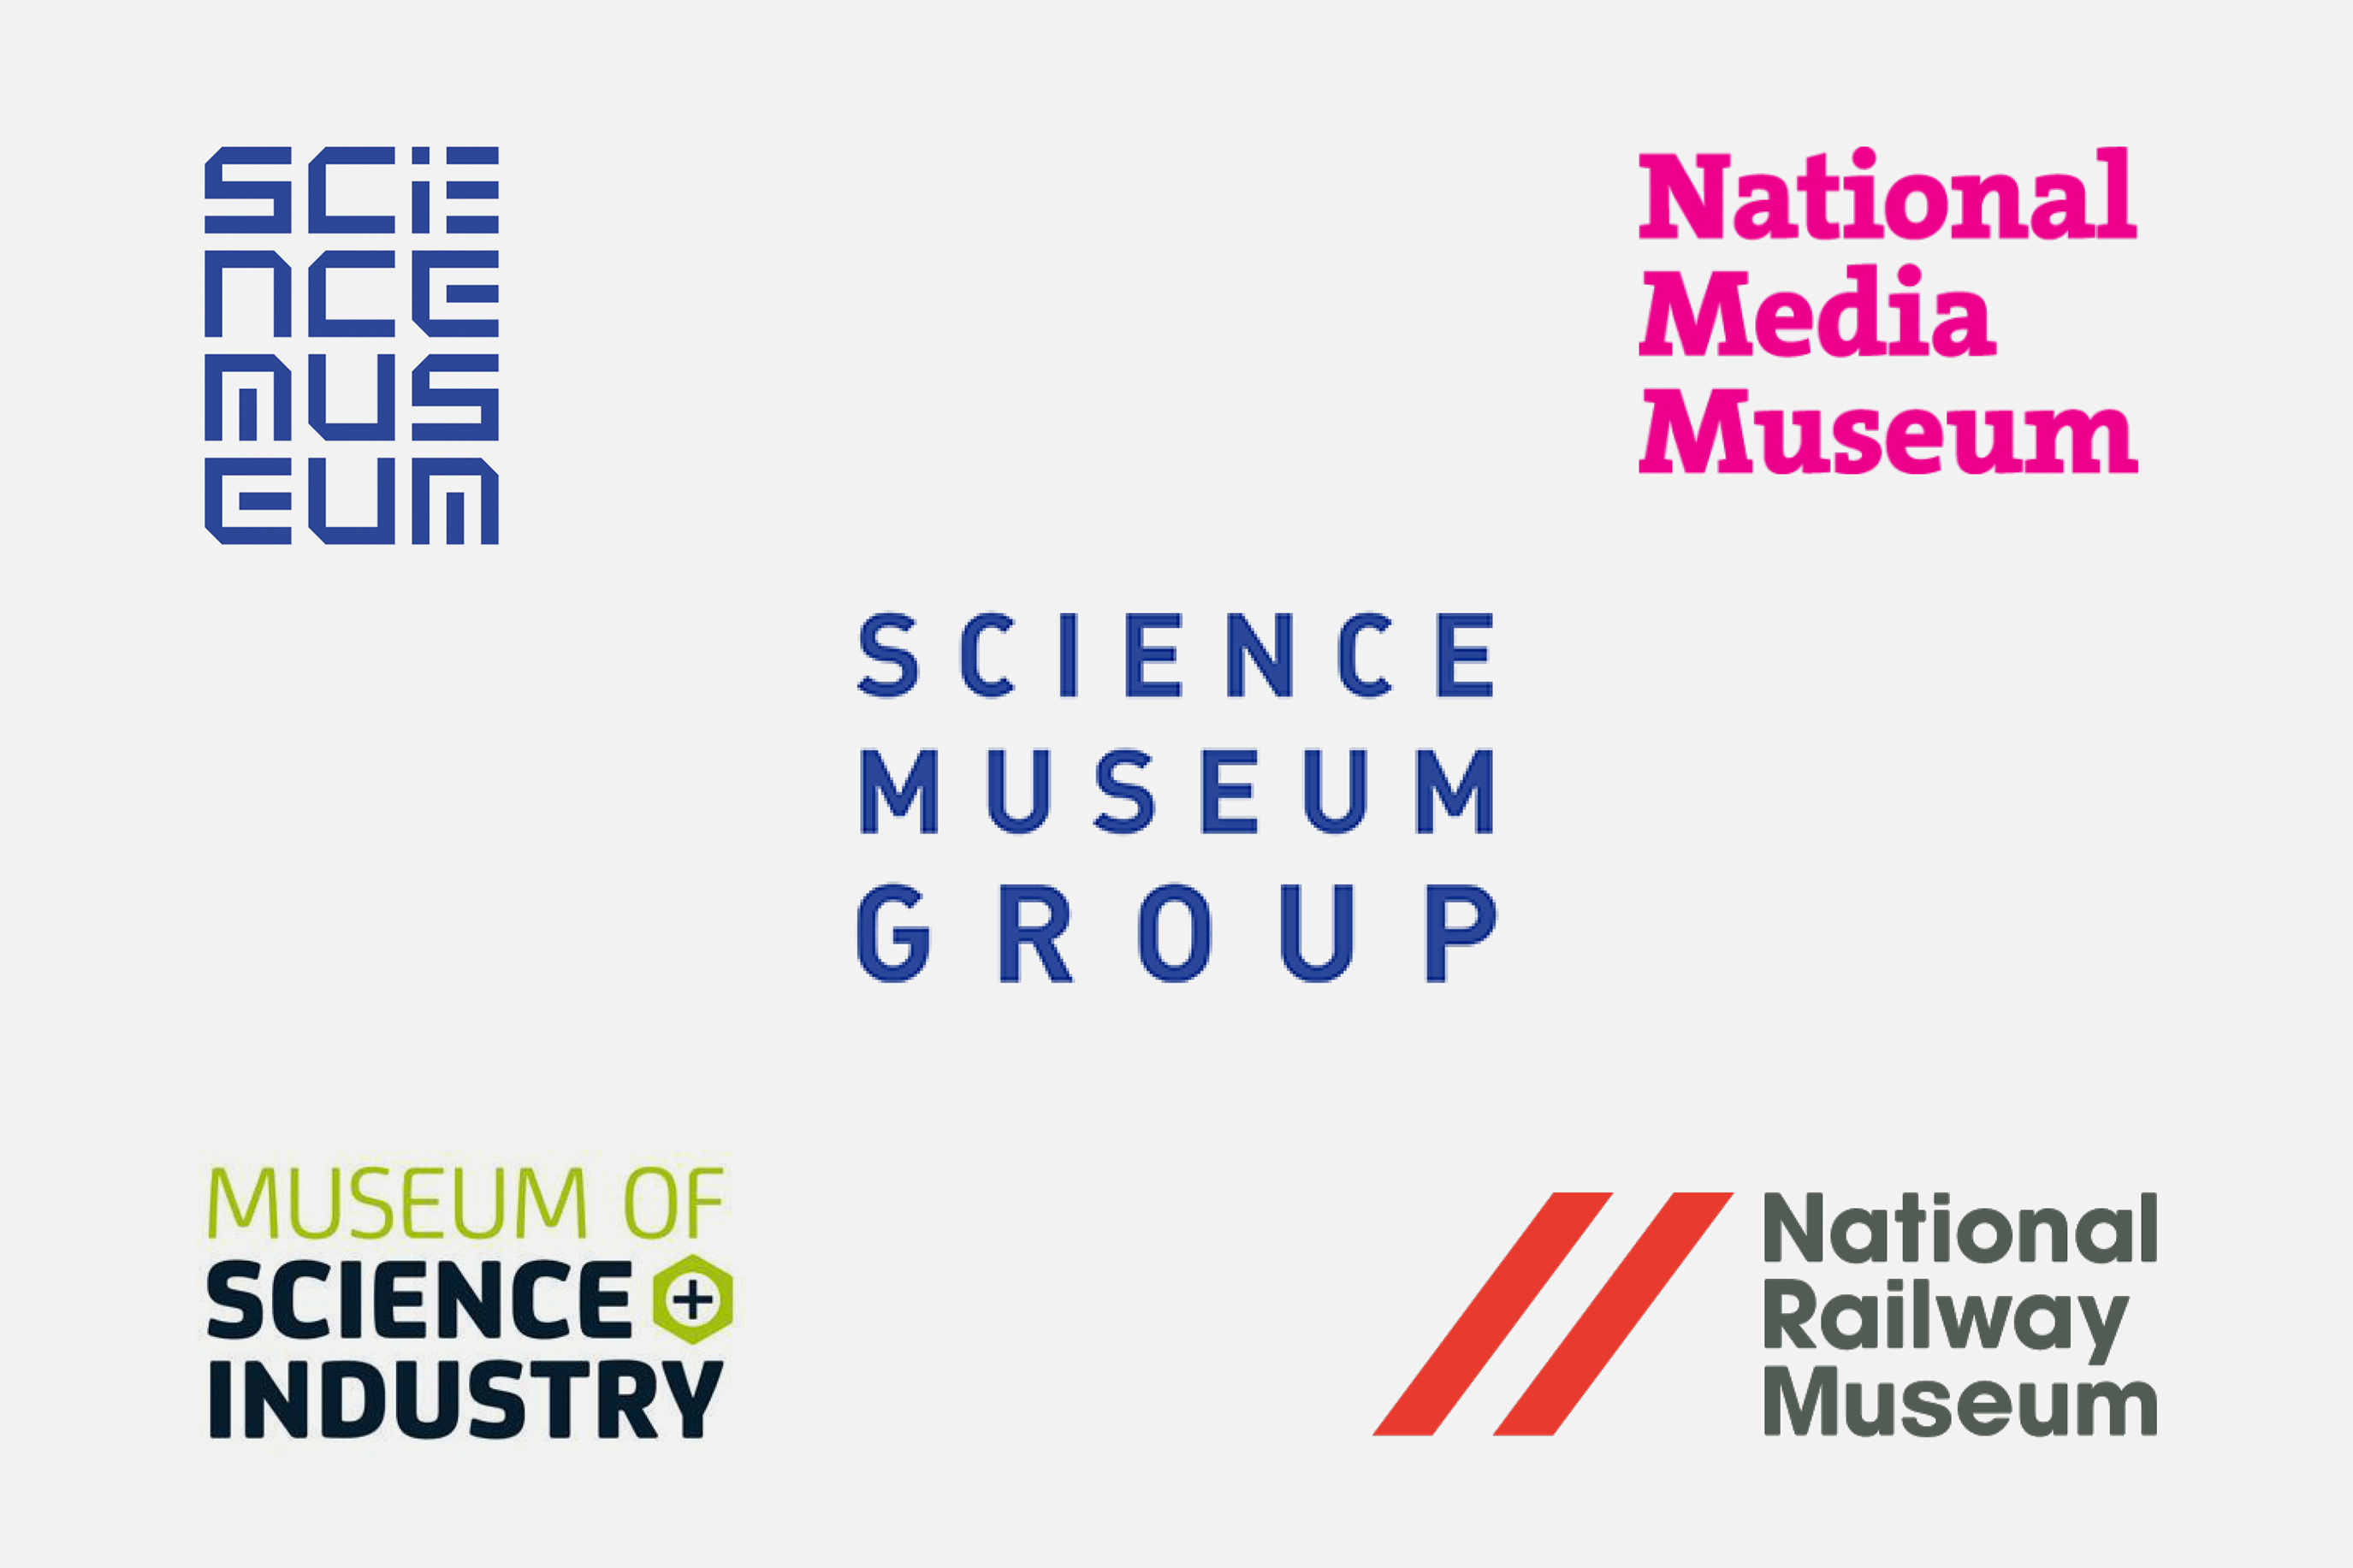 Previous logos from the Science Museum Group museums. 